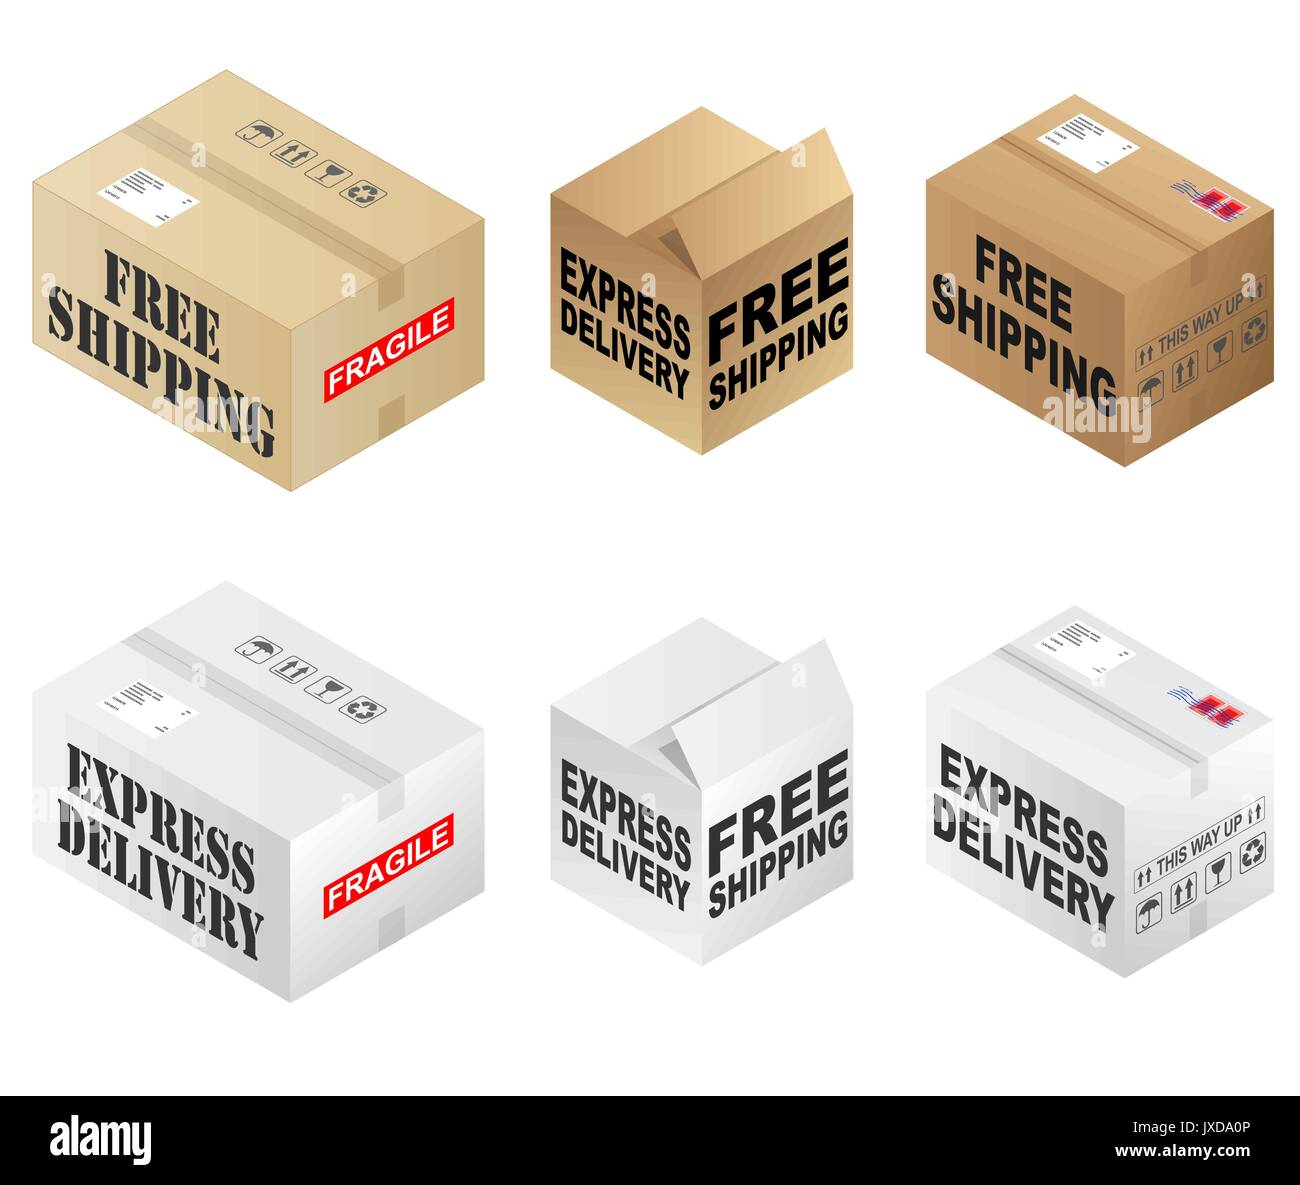 Free shipping and express delivery cardboard box vectors Stock Vector Image  & Art - Alamy